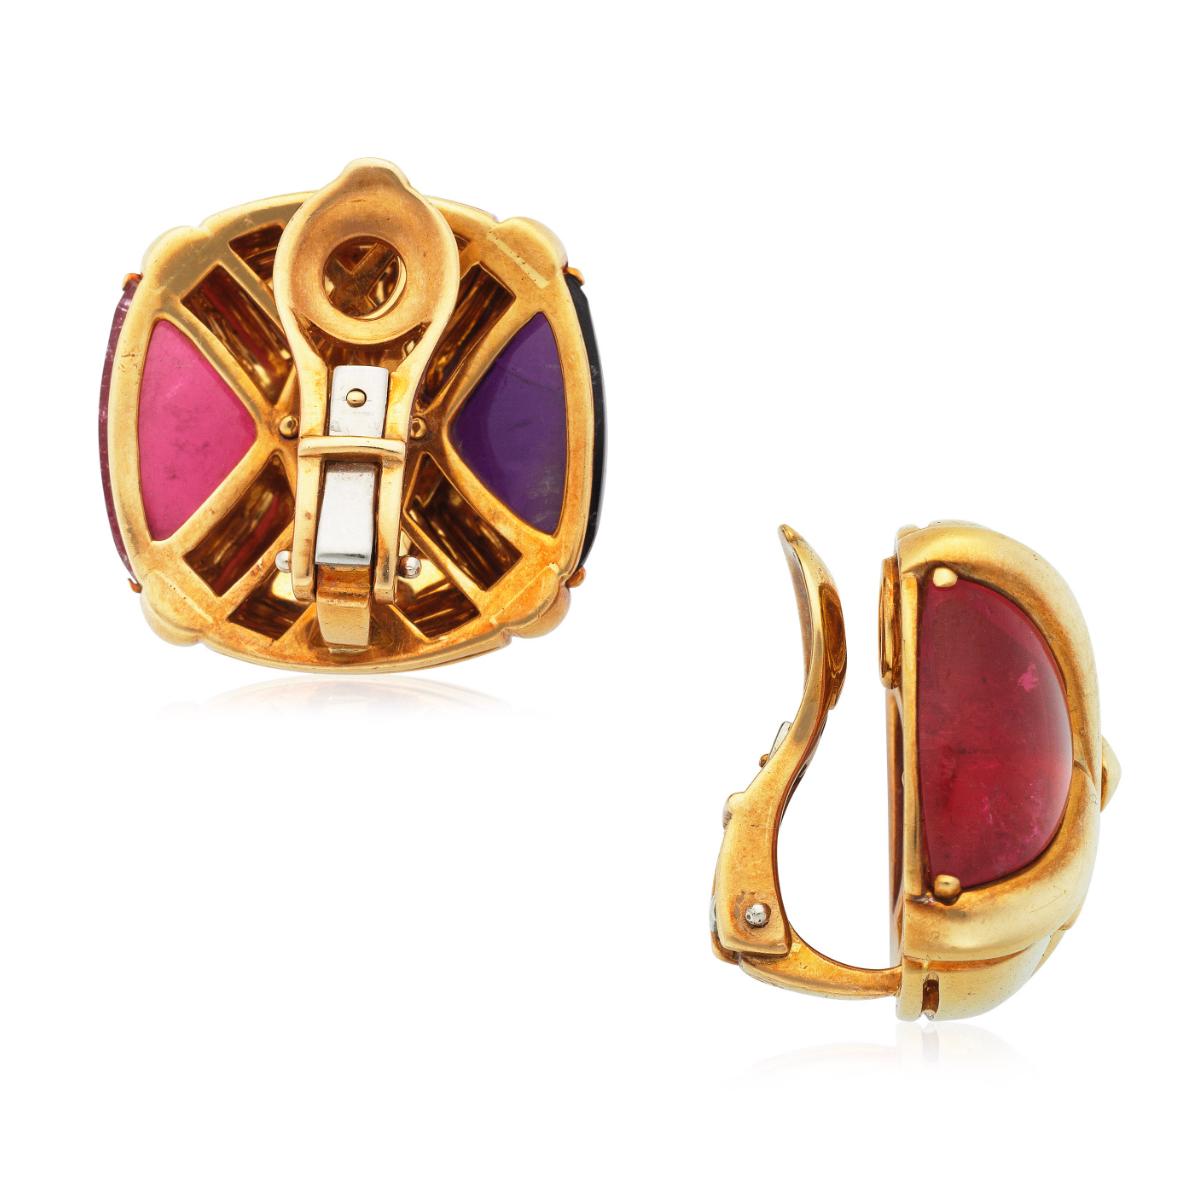 One pair of 18 karat yellow gold earrings featuring two fine quality cabochon Amethysts and Tourmalines measuring 2.1 x 2.1 cm.  The earrings have clip backs weighing in total 31.5 grams.  They are marked 750 and numbered 1990.